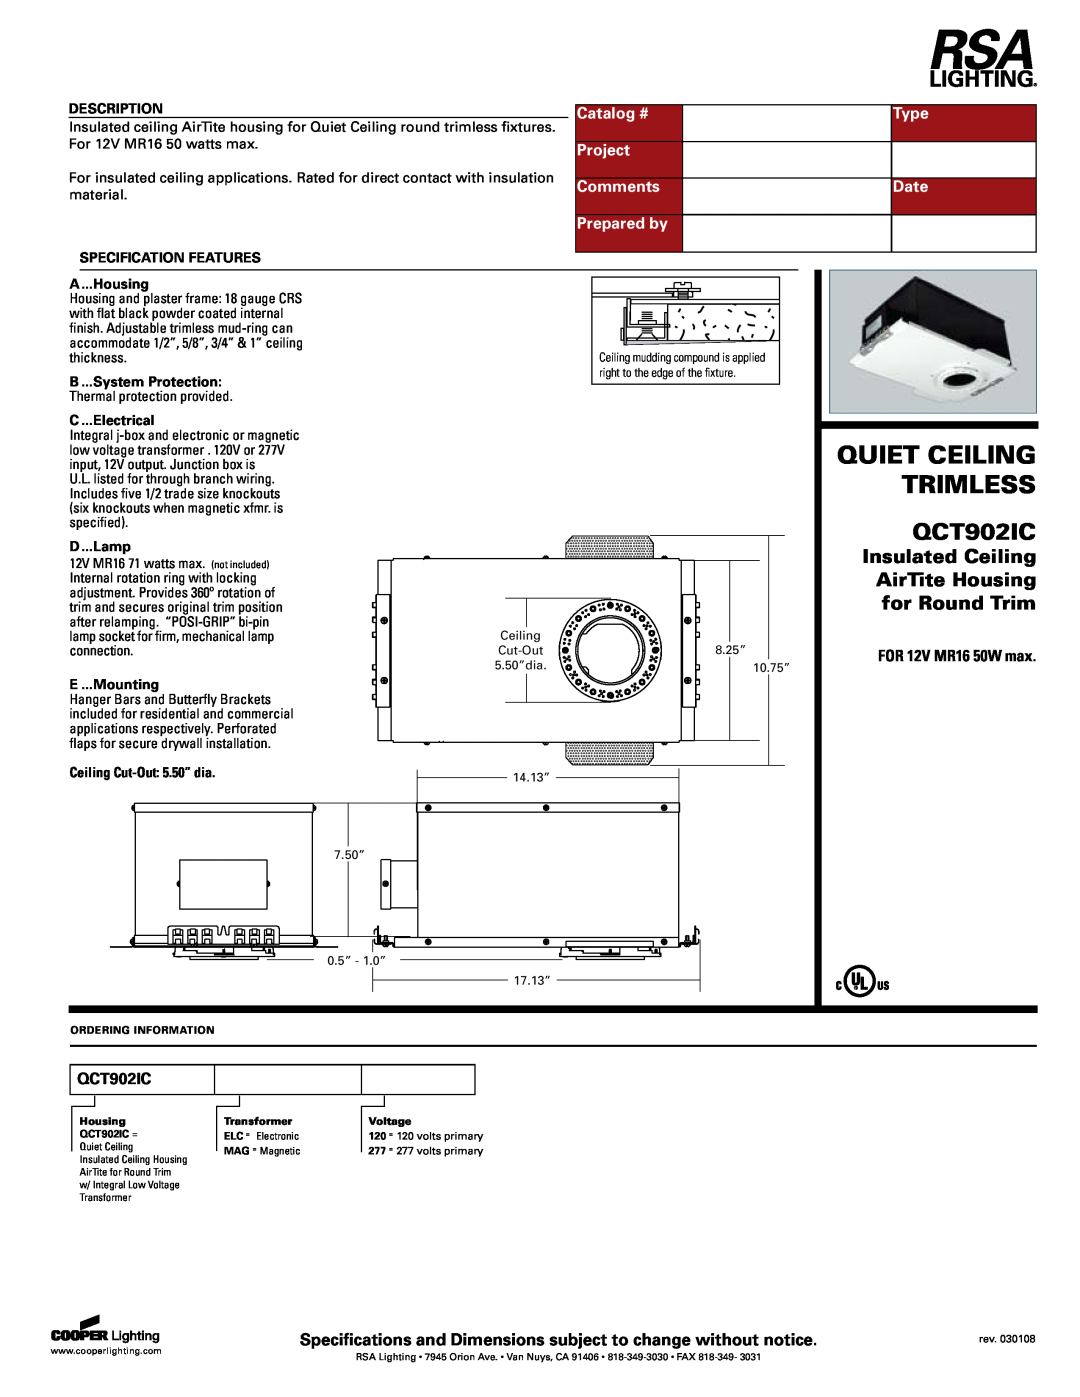 Cooper Lighting QCT-902-IC specifications Quiet Ceiling, Trimless, QCT902IC, Insulated Ceiling, AirTite Housing, Catalog # 